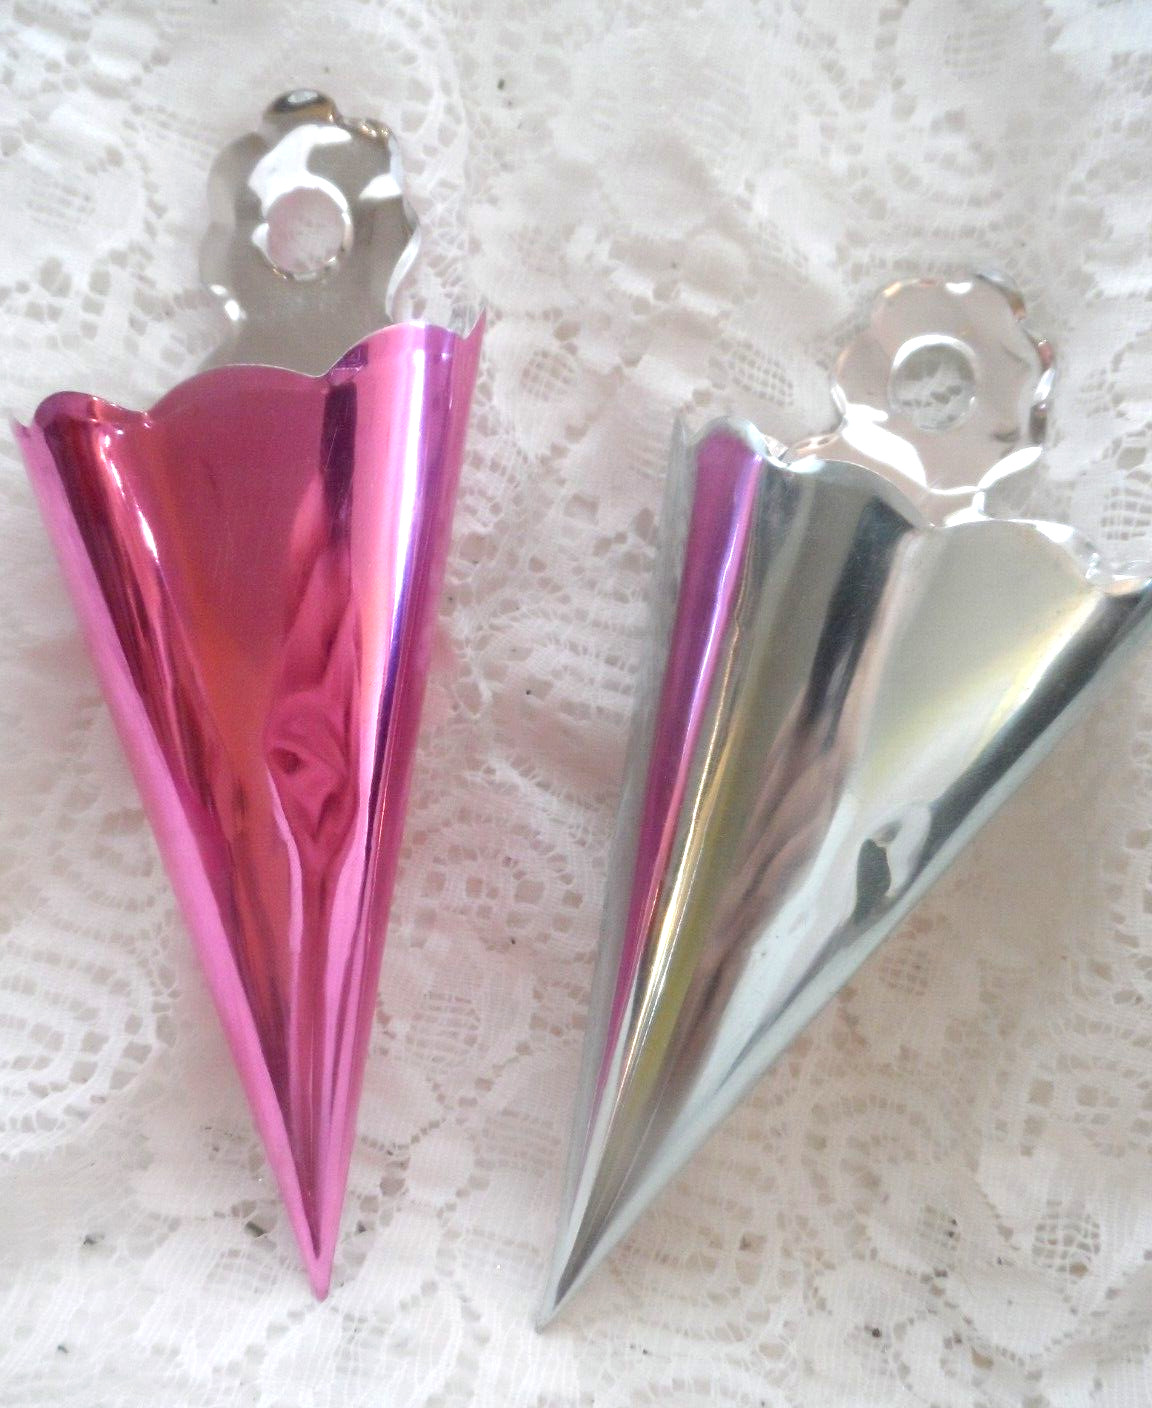 Vintage Christmas Ornaments - 2 FOIL CONE CANDY CONTAINERS- SILVER & PINK